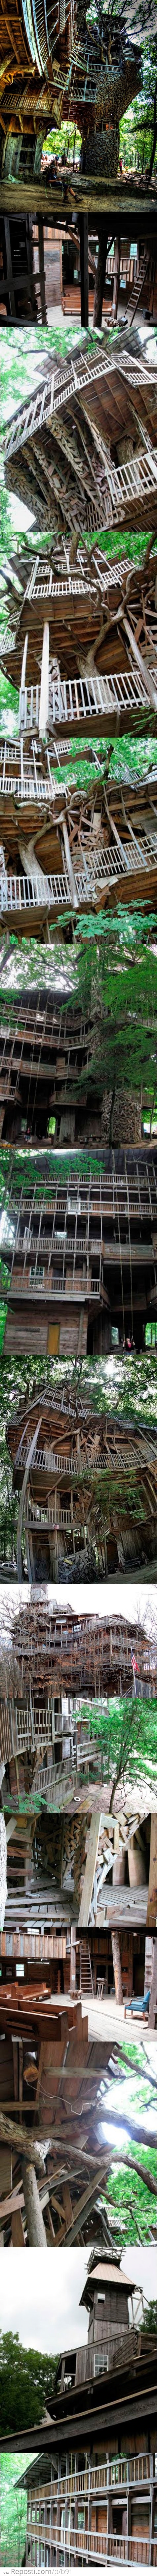 The Minister's Tree House